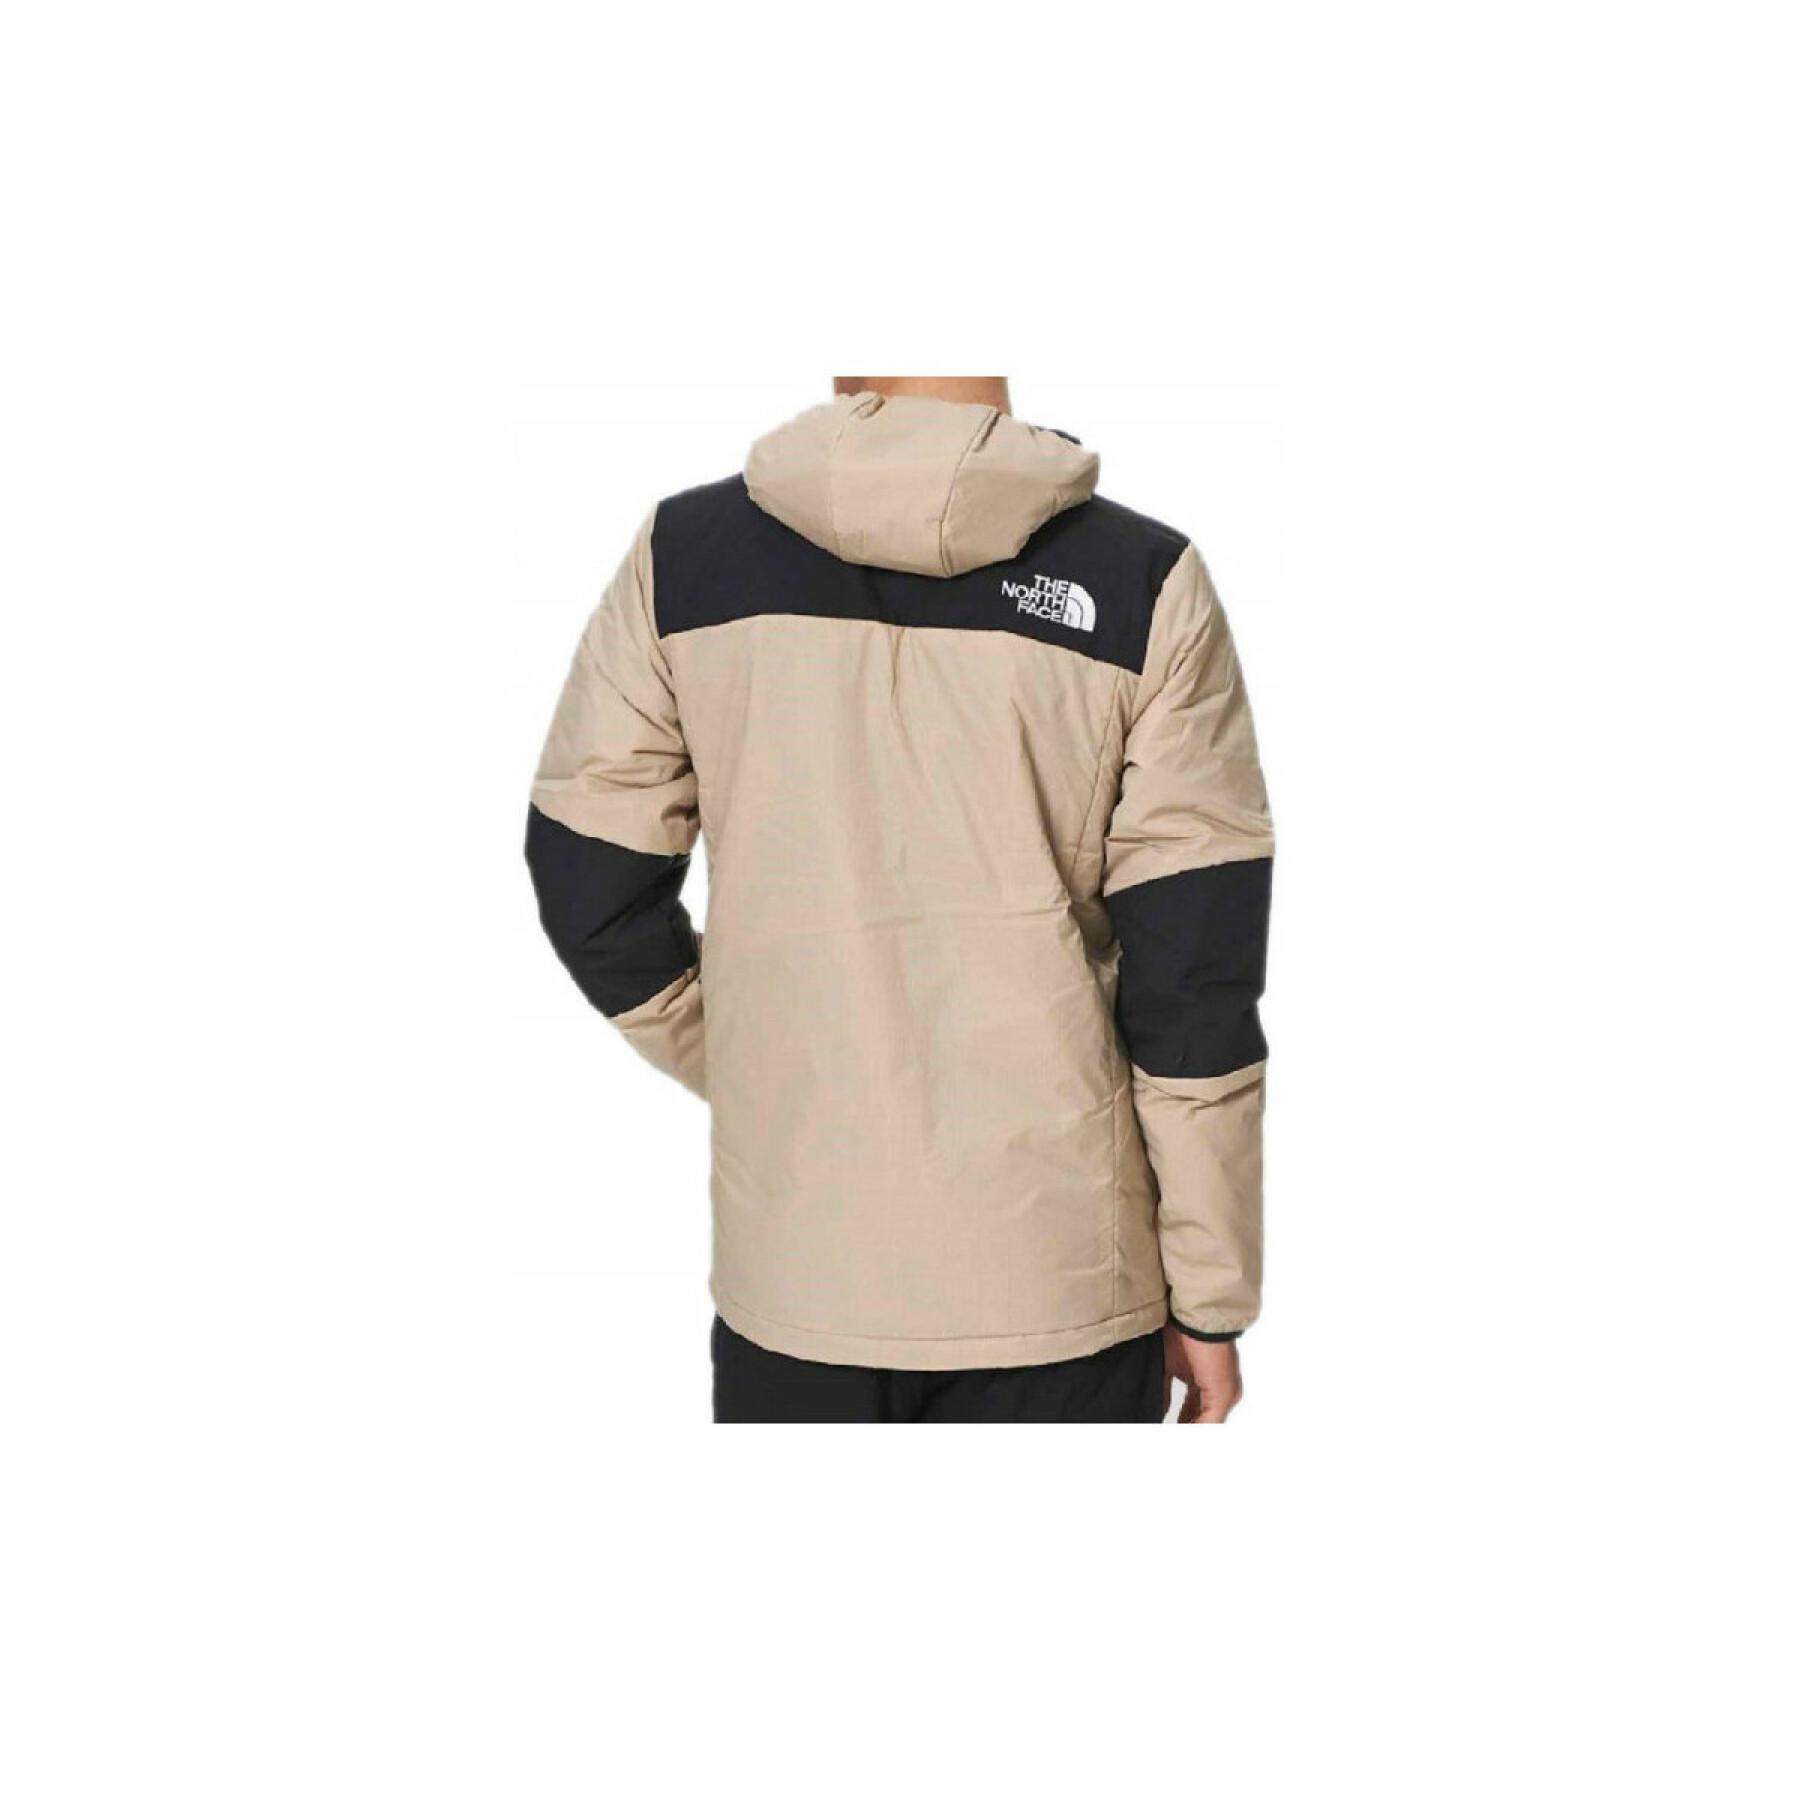 Hooded sweatshirt The North Face Himalayan Light Synth